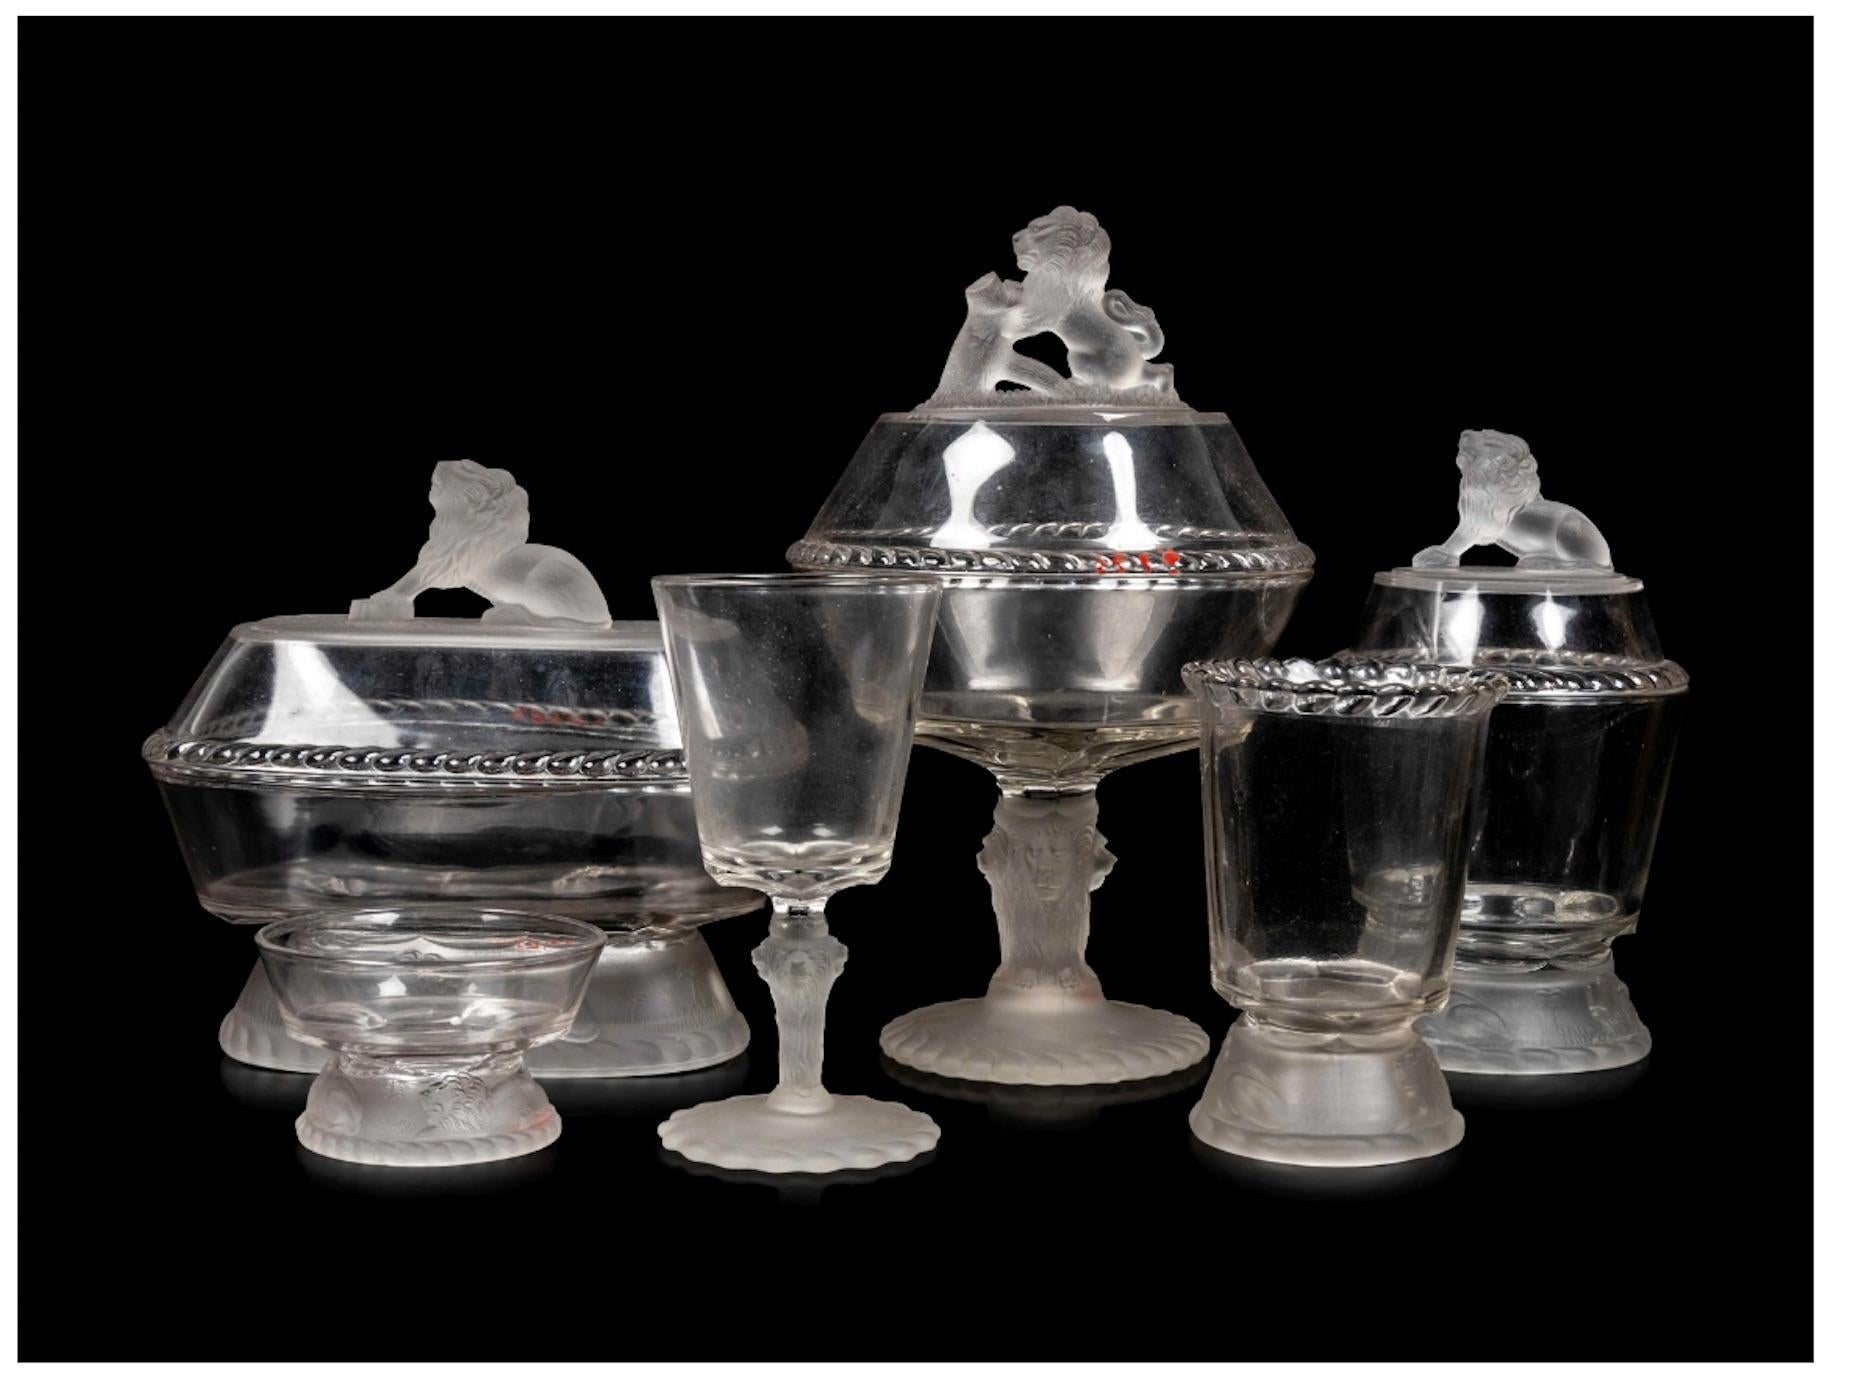 A Gillinder and Sons Lion Pattern Glass Service
Philadelphia, PA, Second Half 19th Century
comprising compotes, goblets, an egg cup, sauce dishes, plates, platters, and other articles.
Height of tallest compote 13 1/2 inches.